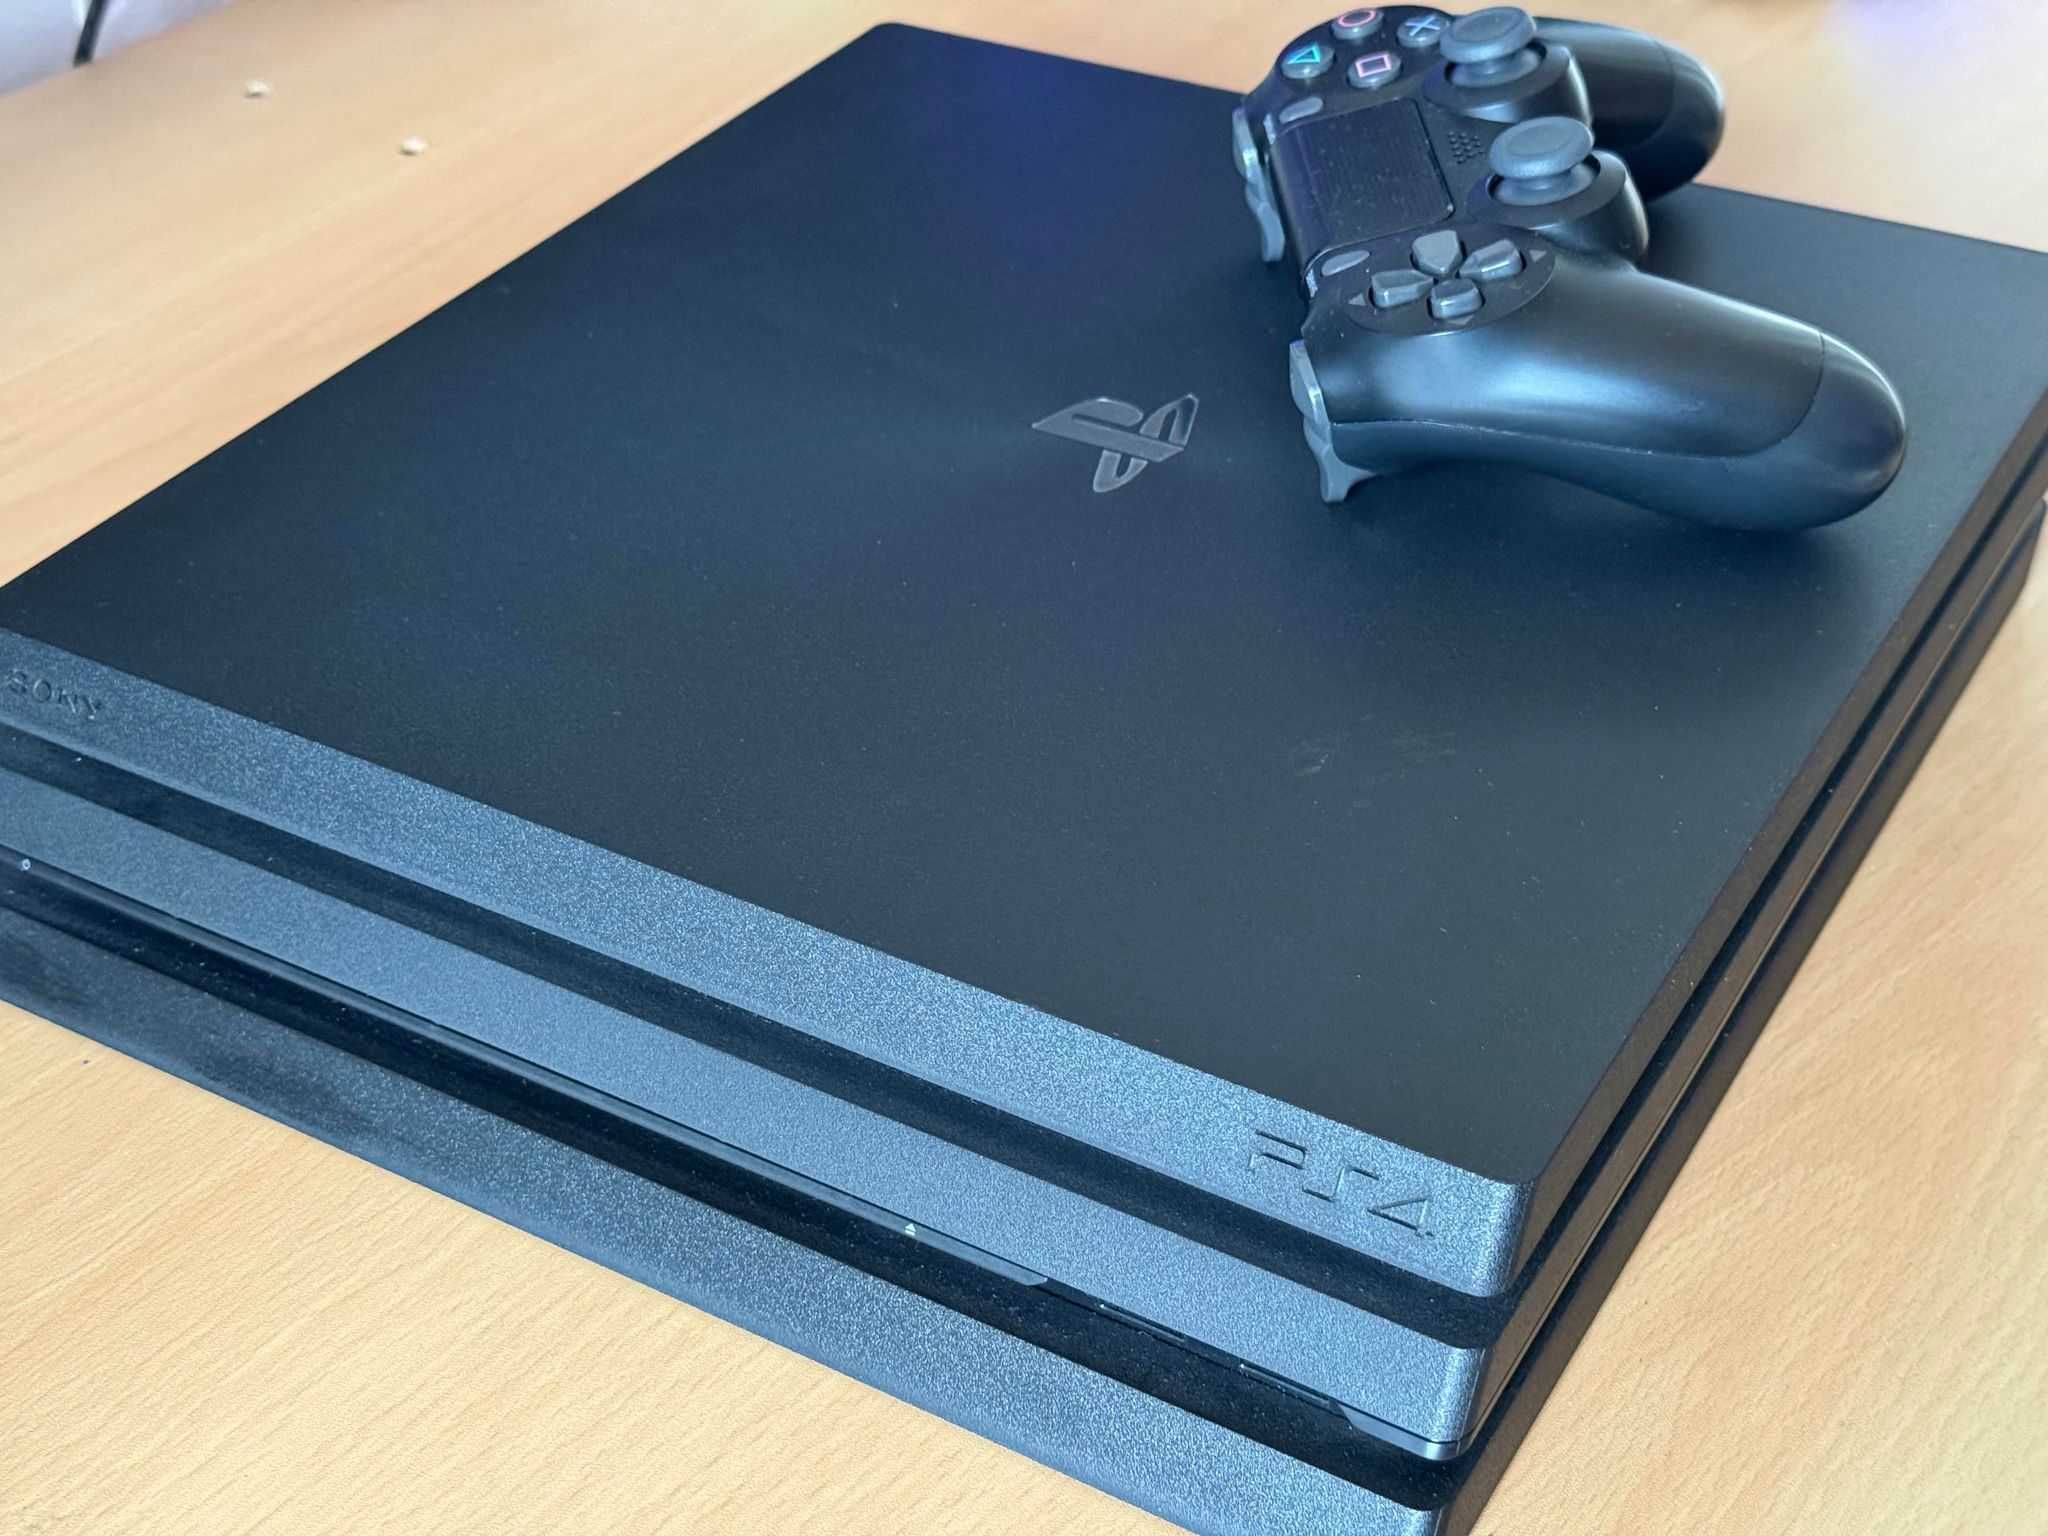 Ps4 Pro / Playstation 4 Pro / 1TB Memorie